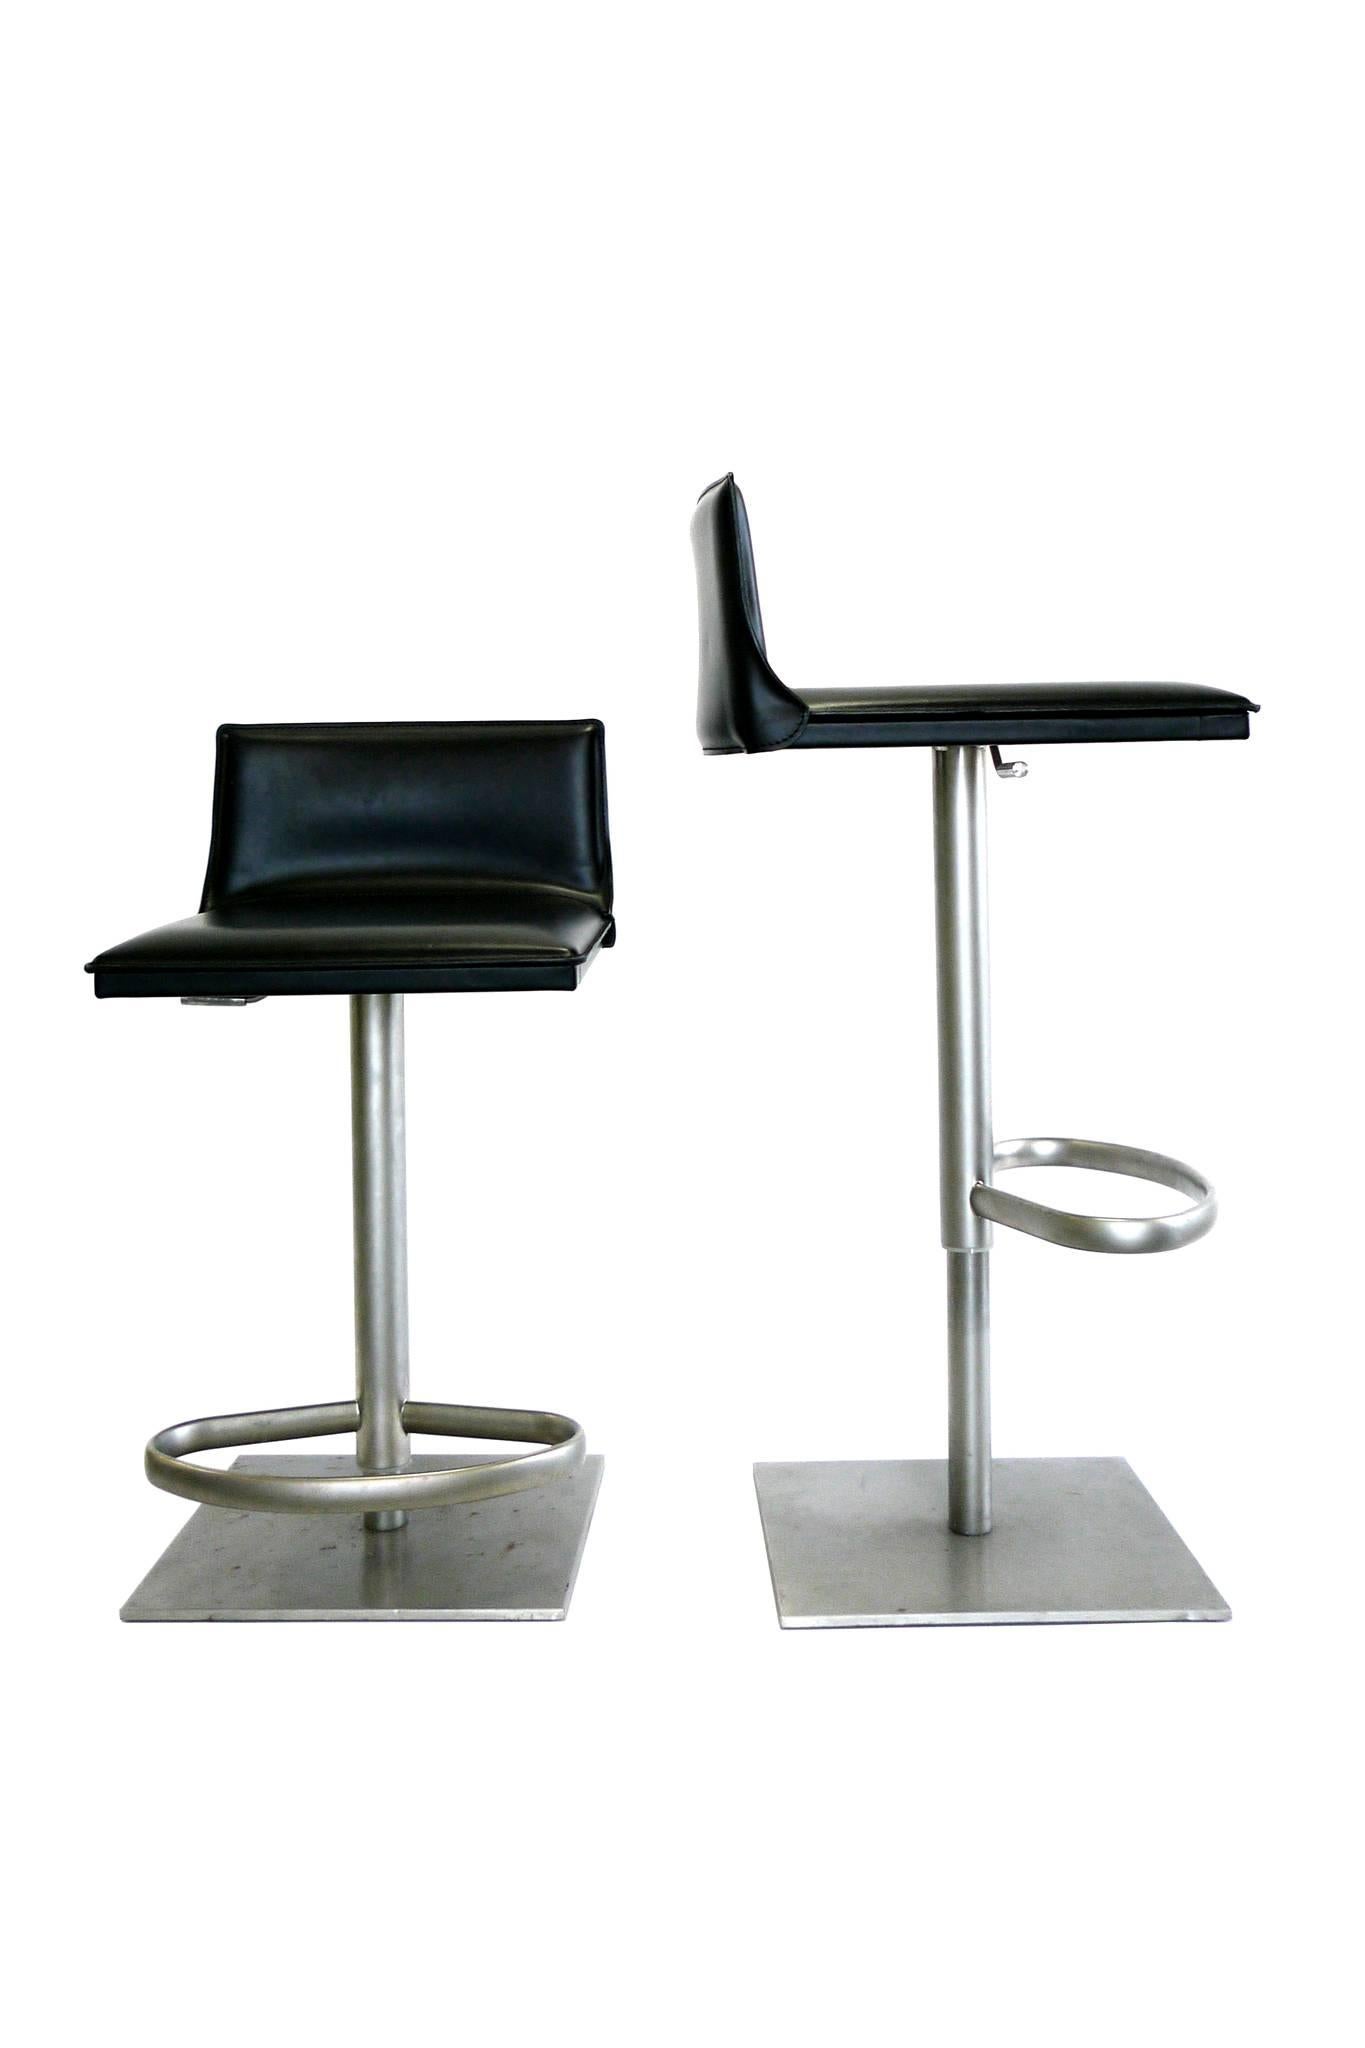 This handsome bar stool is manufactured by Frag. It consists of a well-padded leather seat and steel frame and leg. The chair's height is adjustable, allowing it to fit at a variety of levels. Other dynamic design features include a sturdy base, a